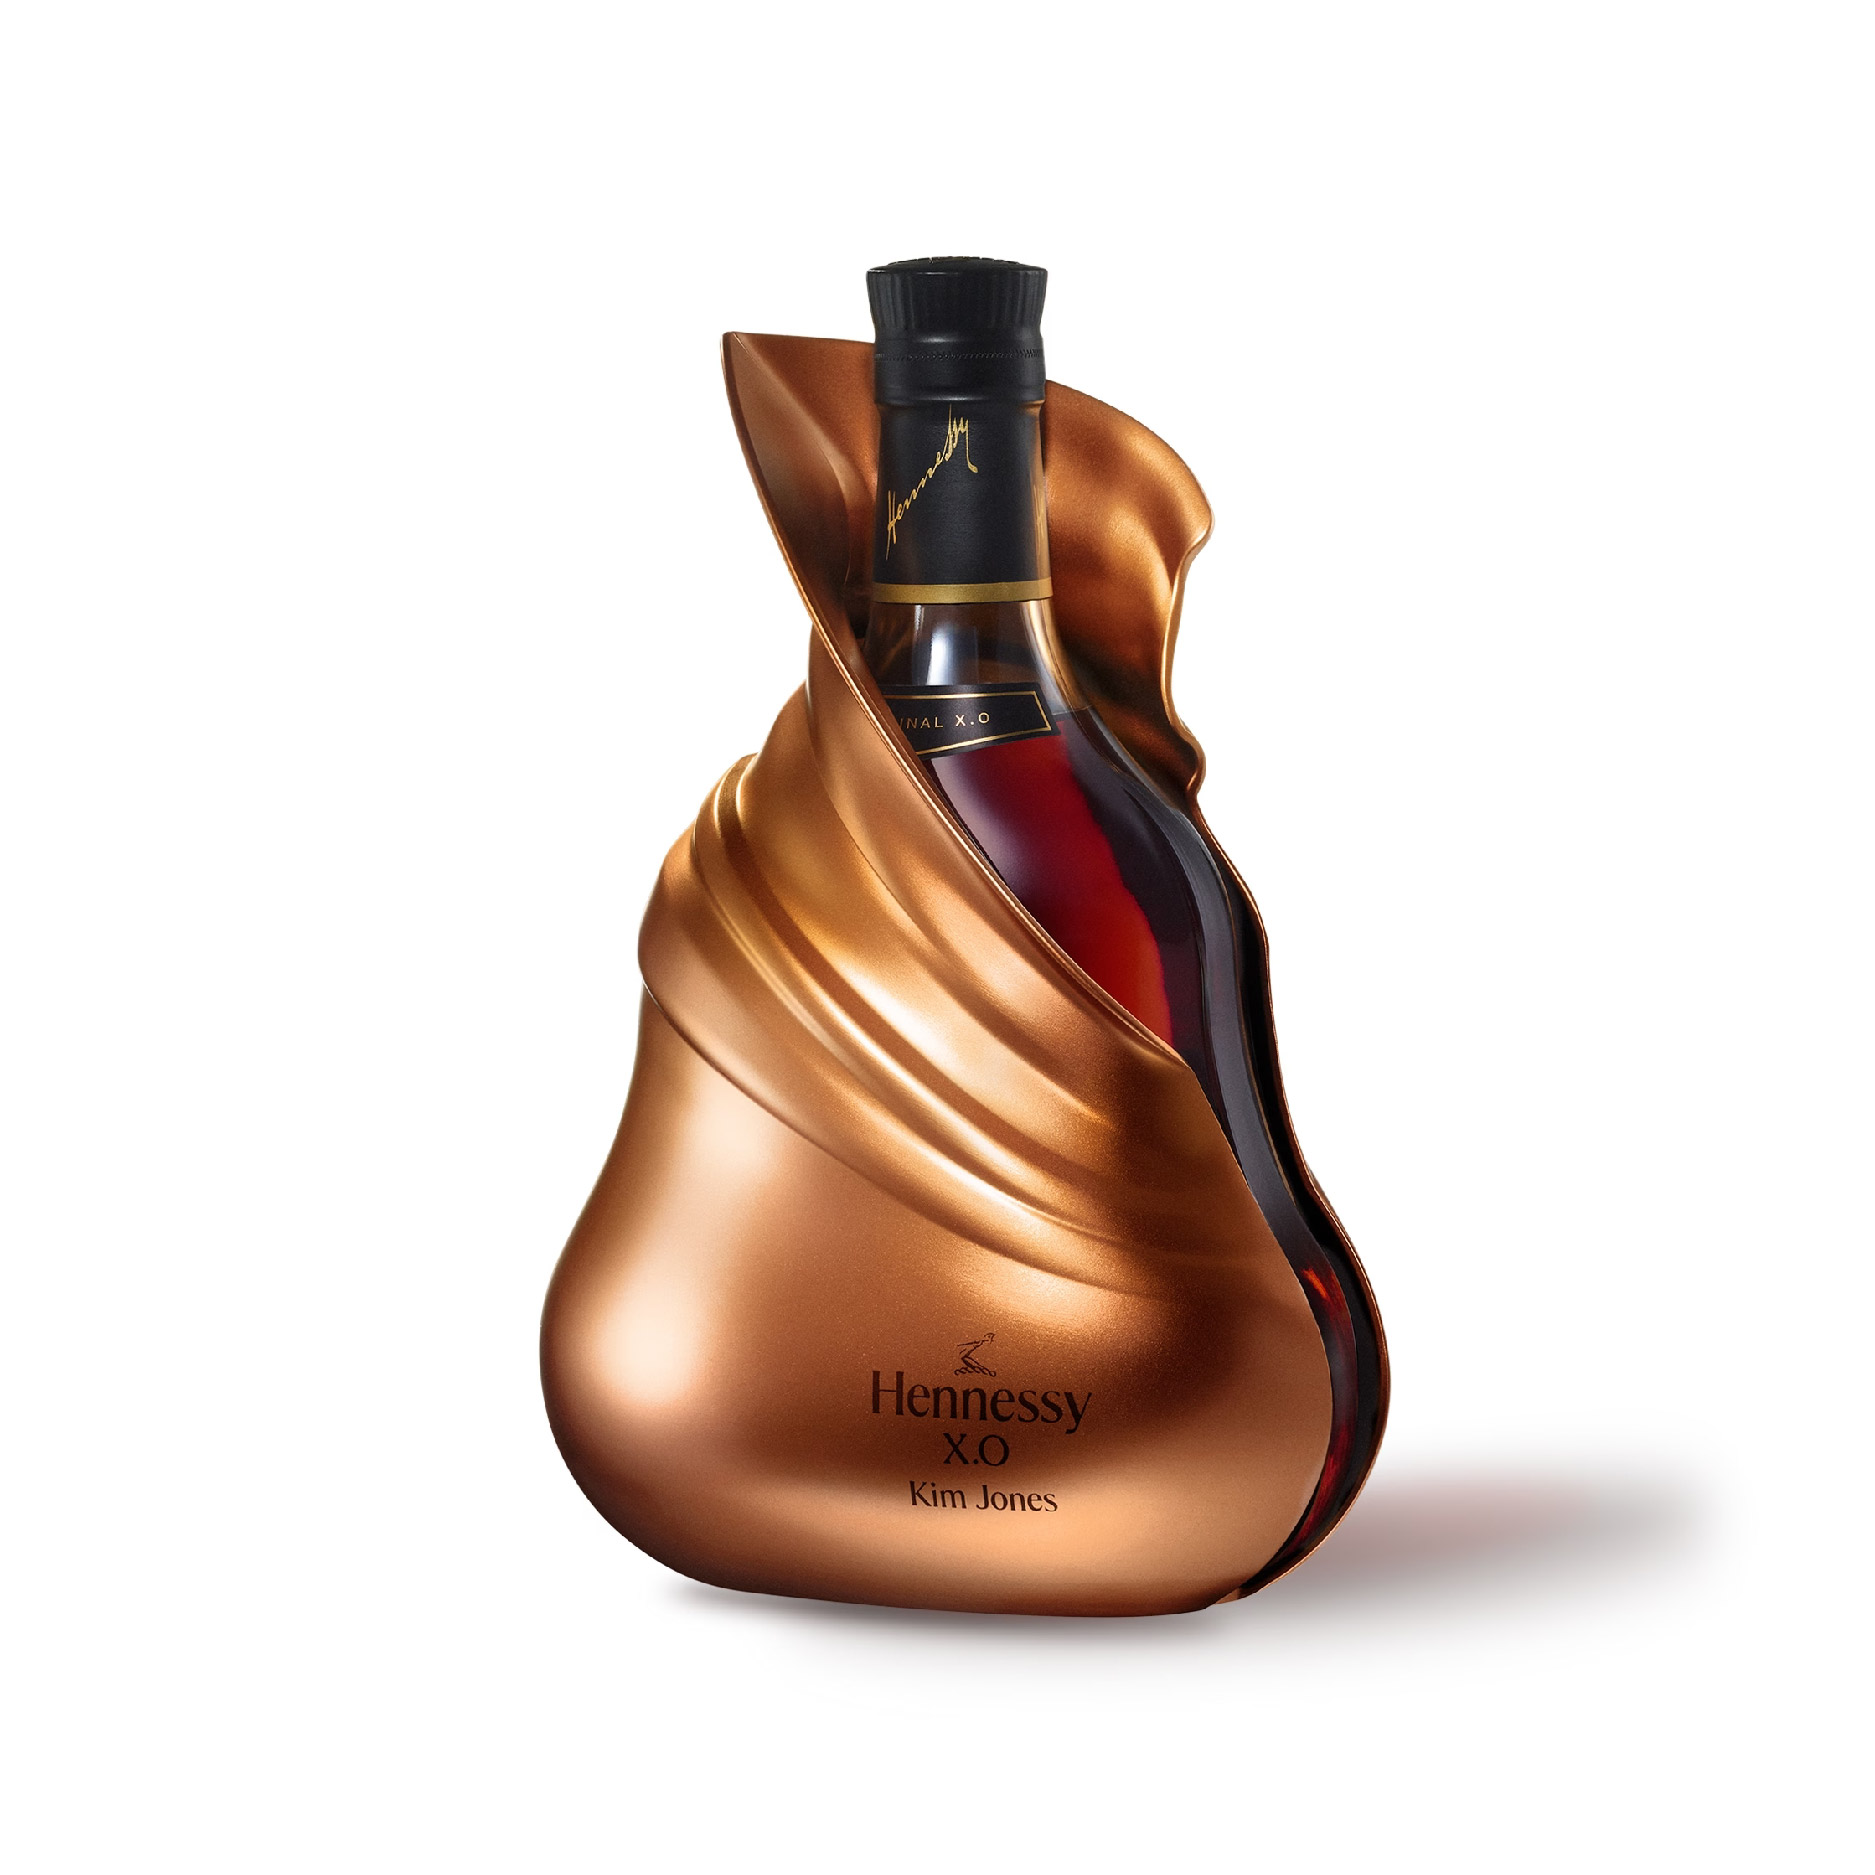 Hennessy V.S Limited Edition NBA 2本セット - ブランデー